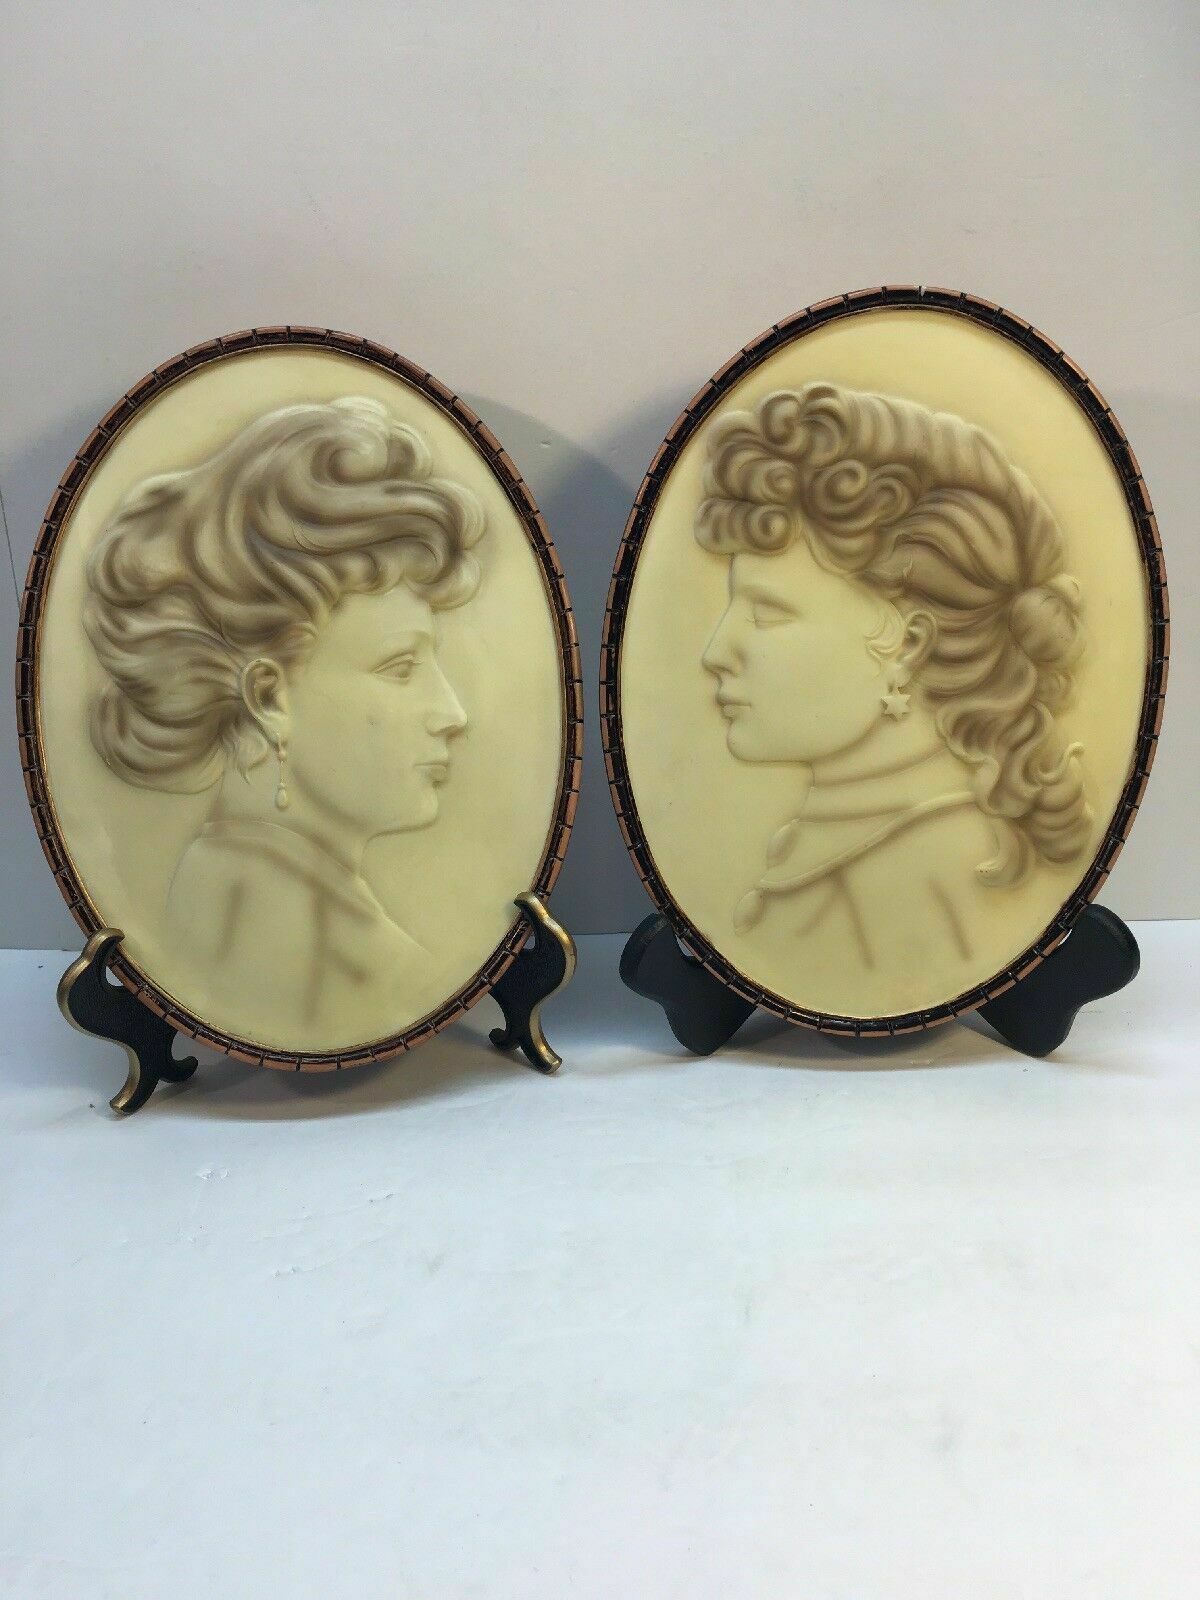 Primary image for Oval Wall Plaques Cameo Victorian Woman Ceramic Vintage 9.5”tall Signed WMG “06”